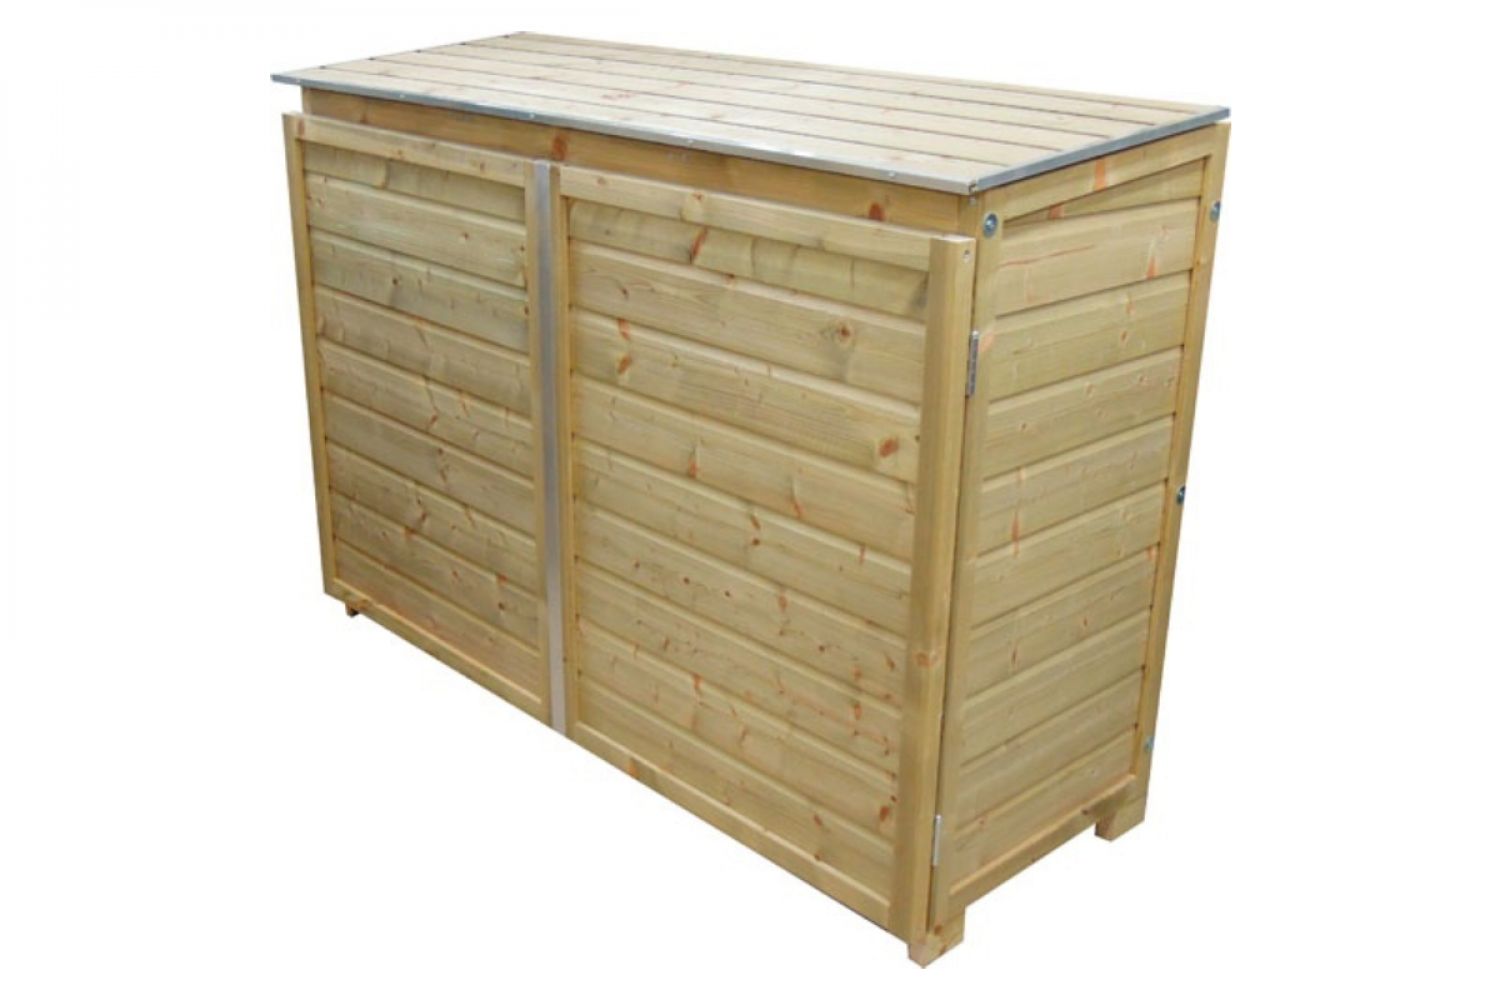 LK120TRIO-R Containerberging | 176x65x111,5 cm - voor 3 containers!